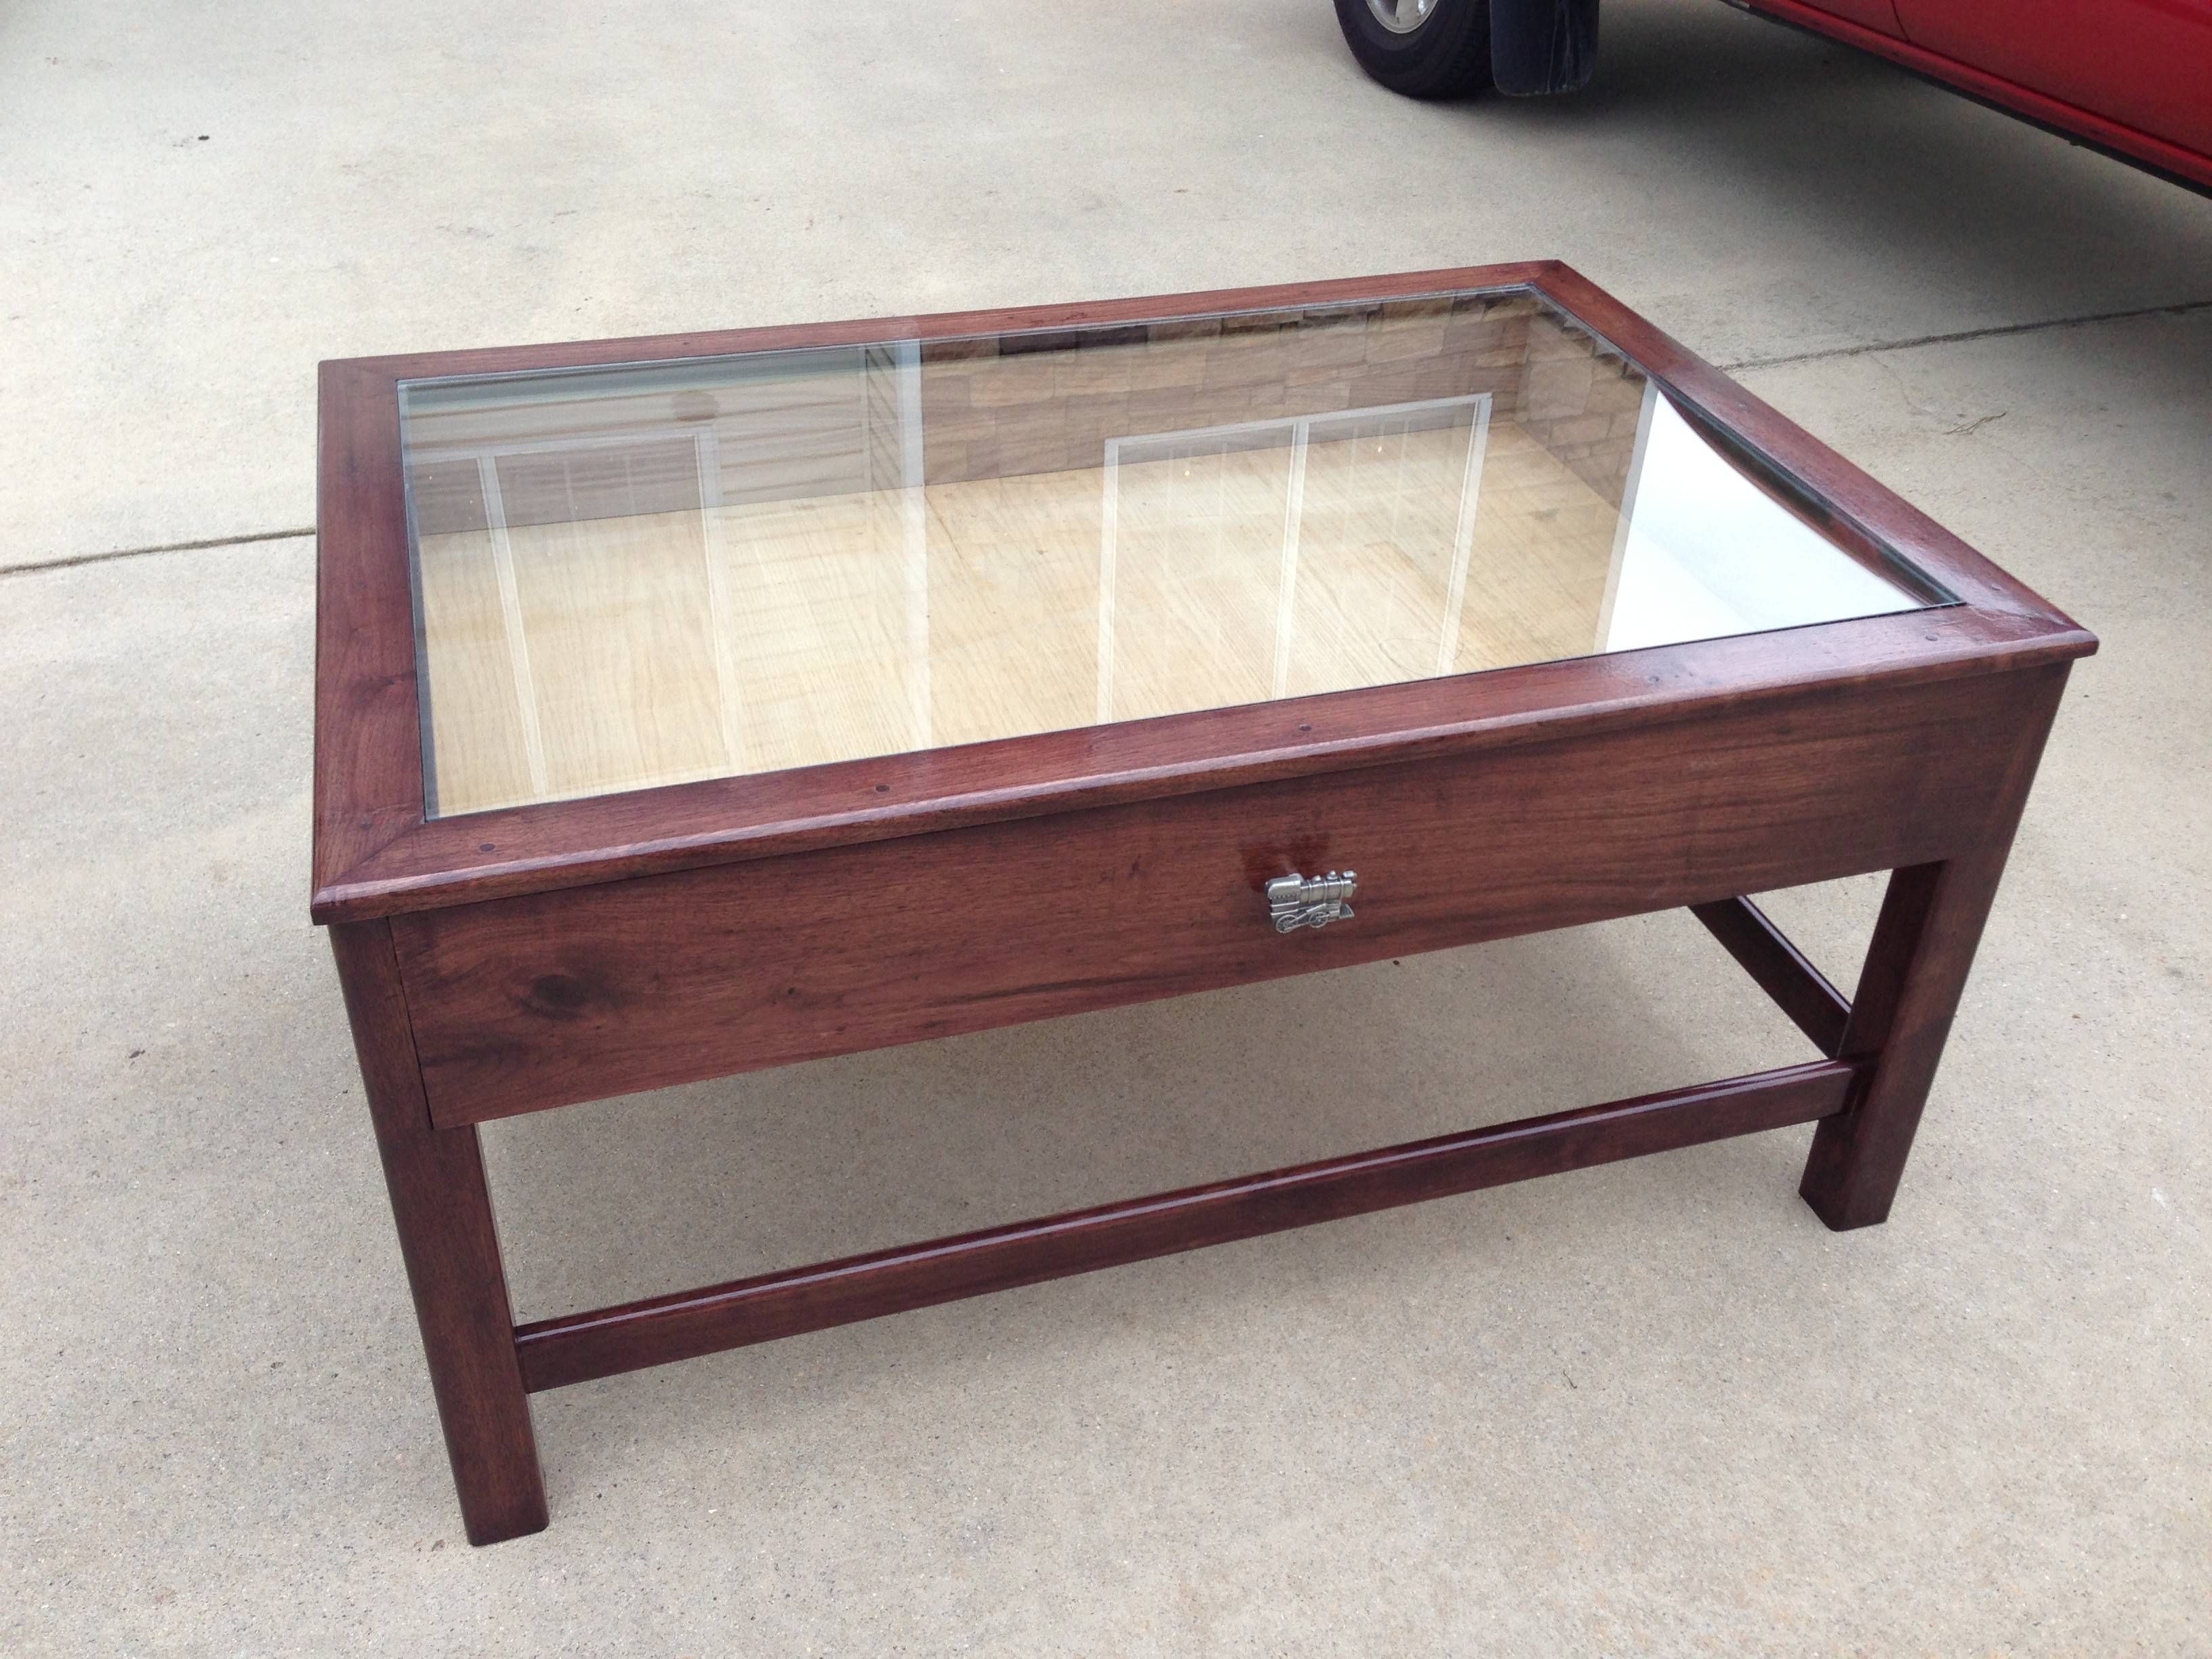 Coffee Table With Glass Top Storage Interior Home Design – Jericho Inside Glass Top Storage Coffee Tables (View 1 of 30)